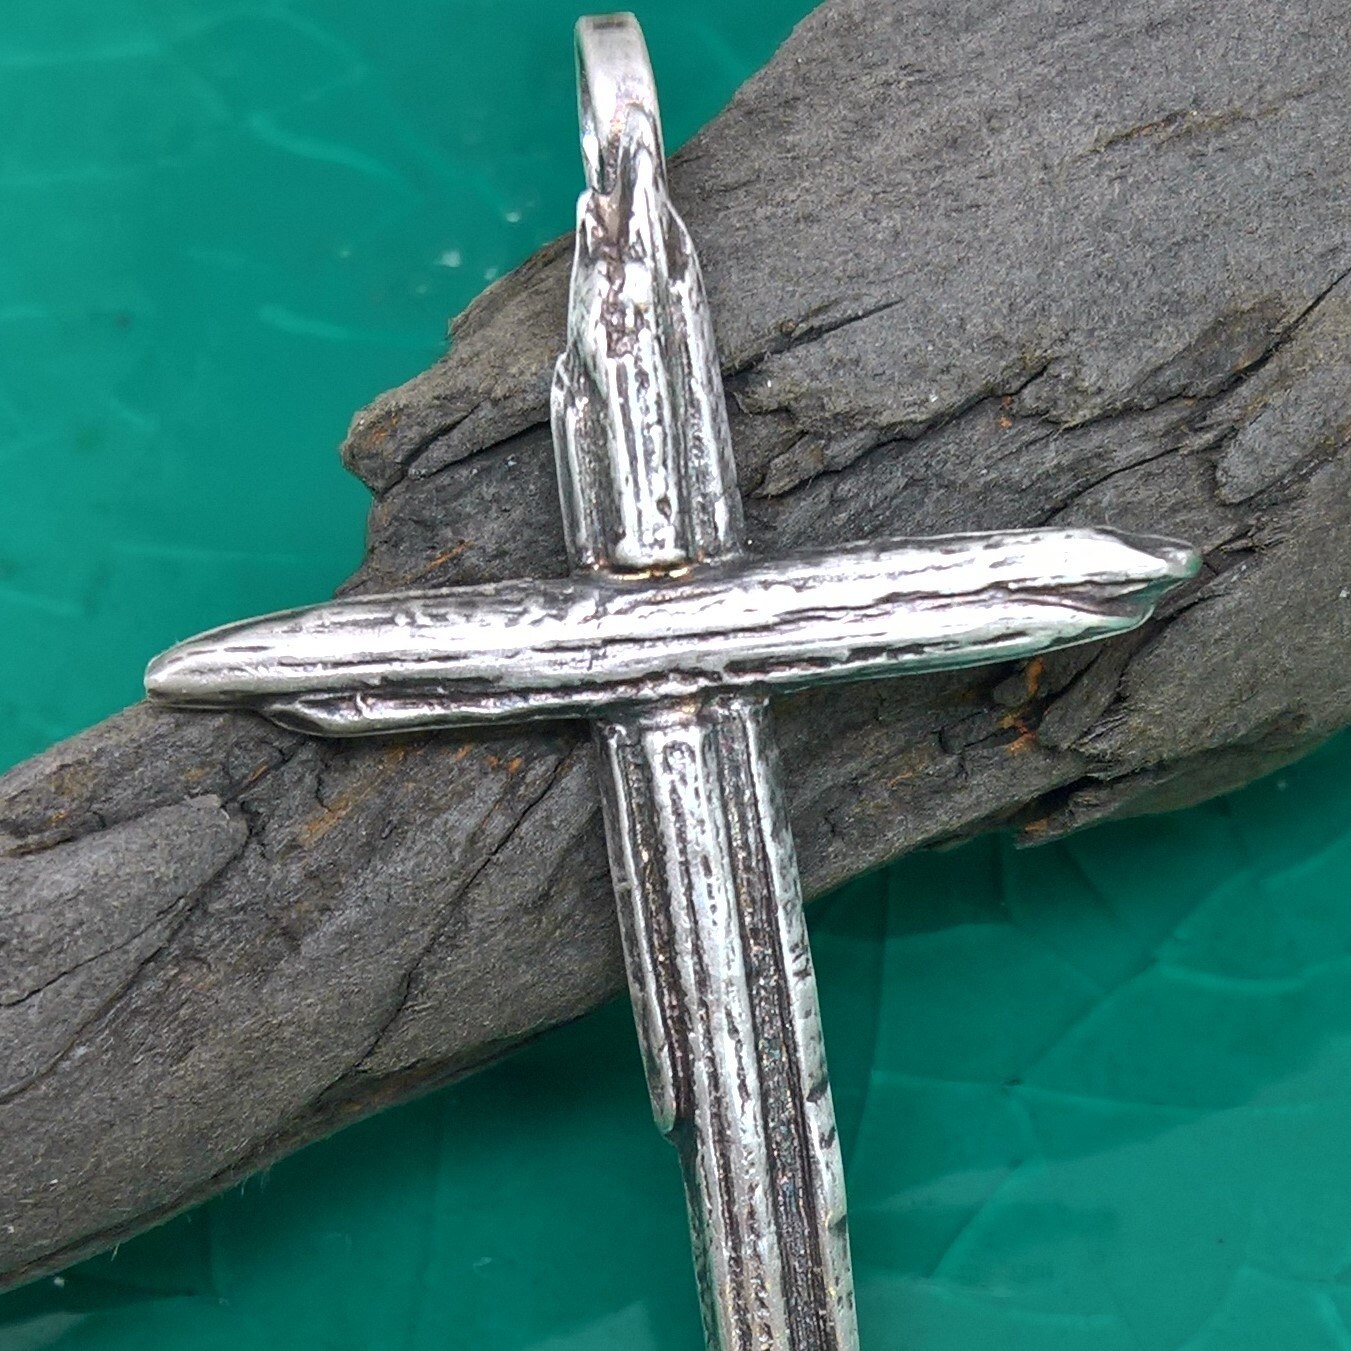 Sterling Silver Weathered Wood Cross Necklace, Mens Cross Necklace